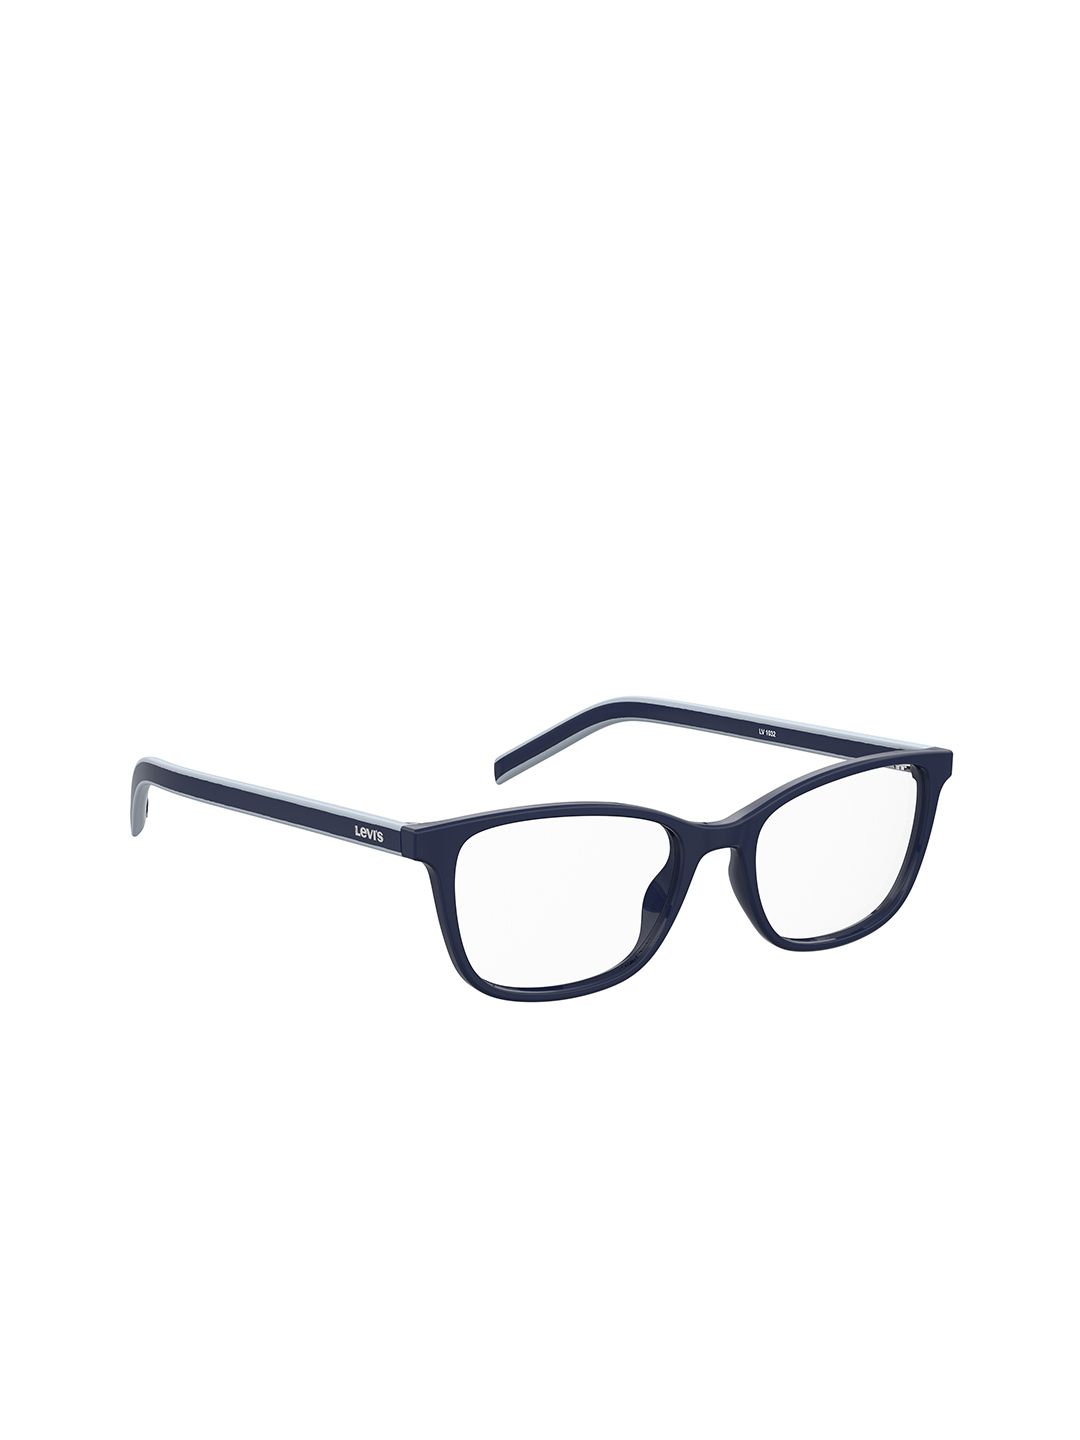 Levis Women Clear Lens & Blue Aviator Sunglasses with Polarised Lens Price in India